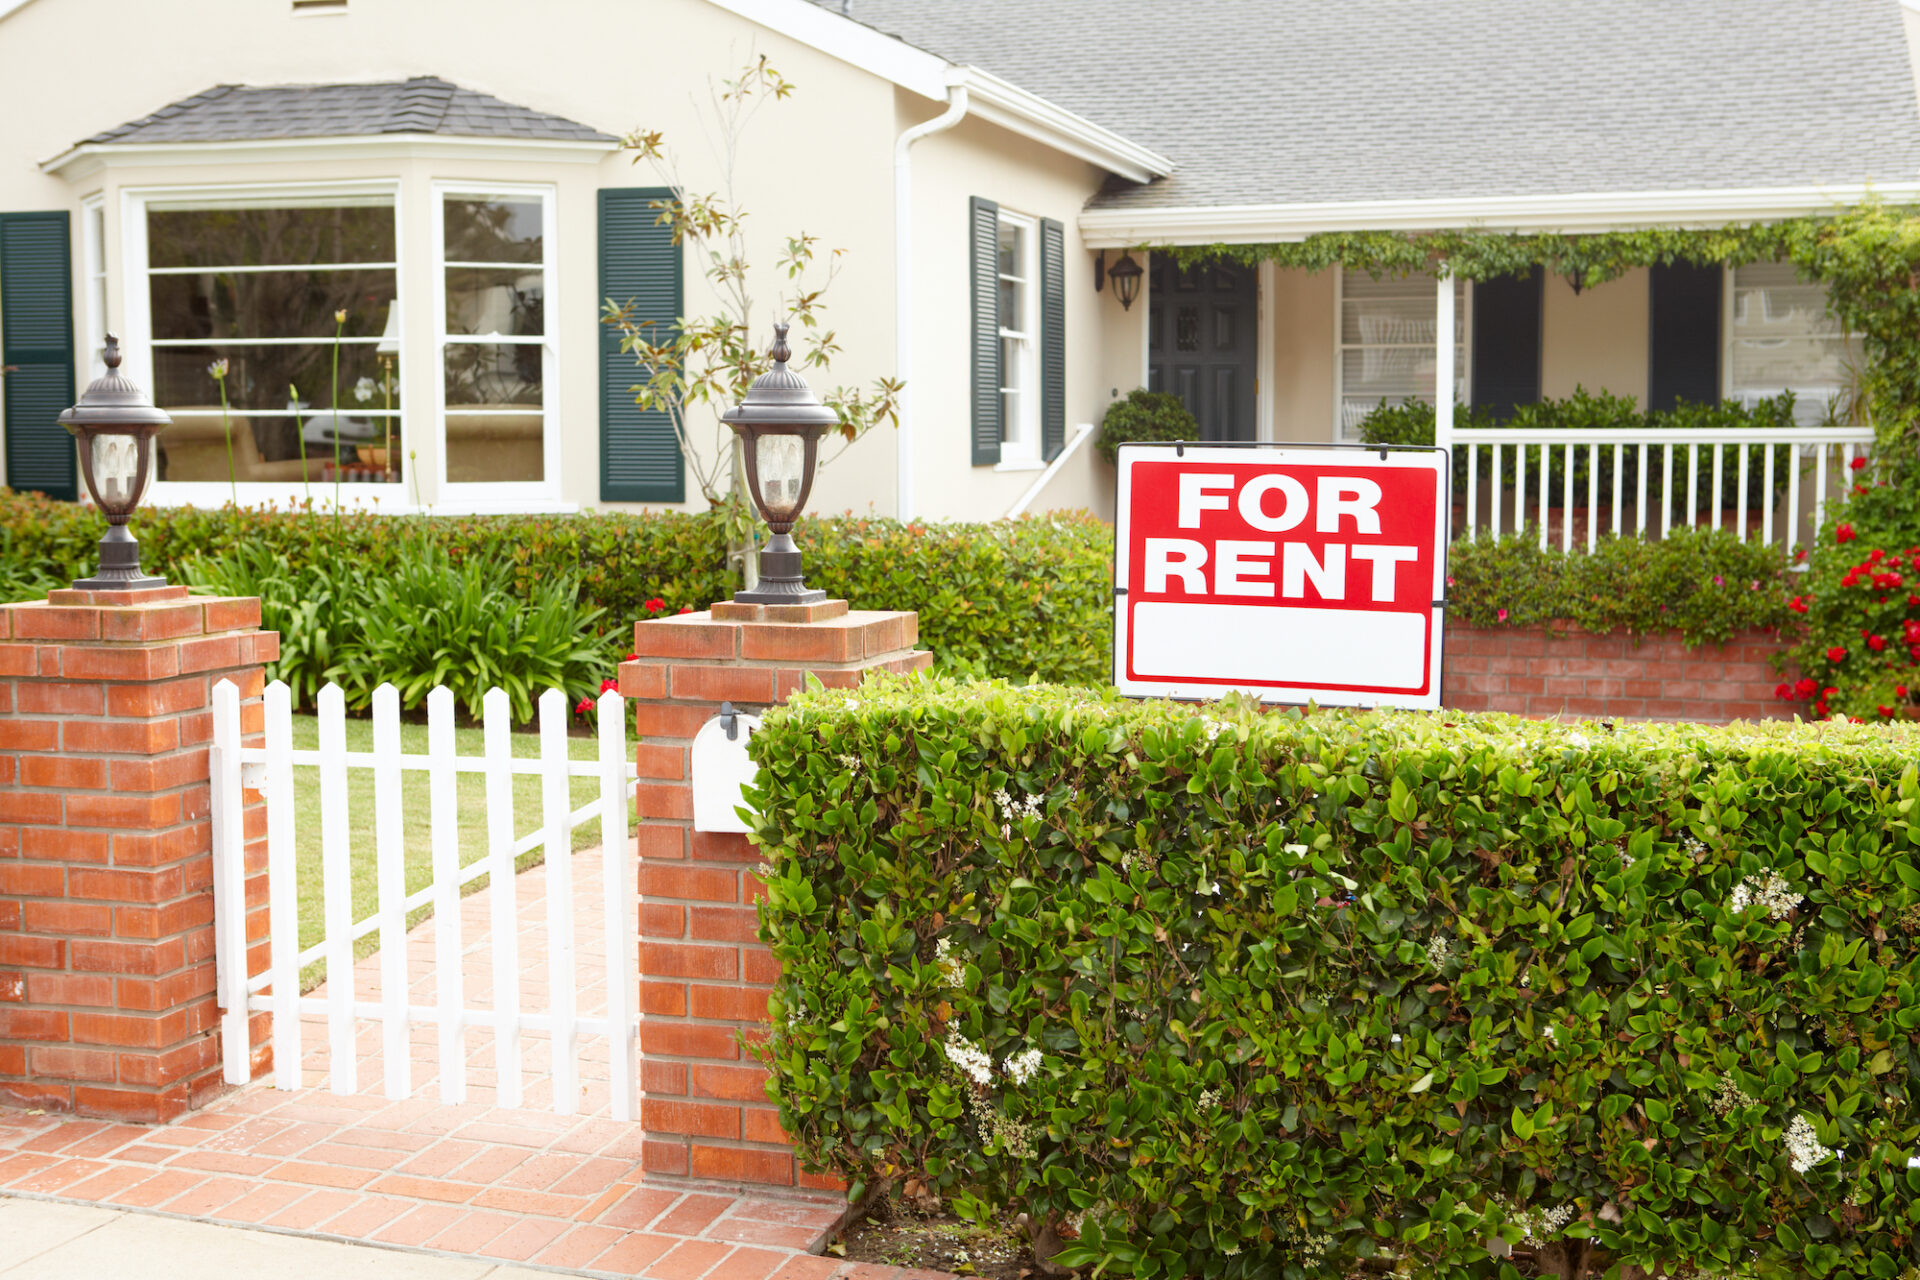 Single-family Rents Break Another Record